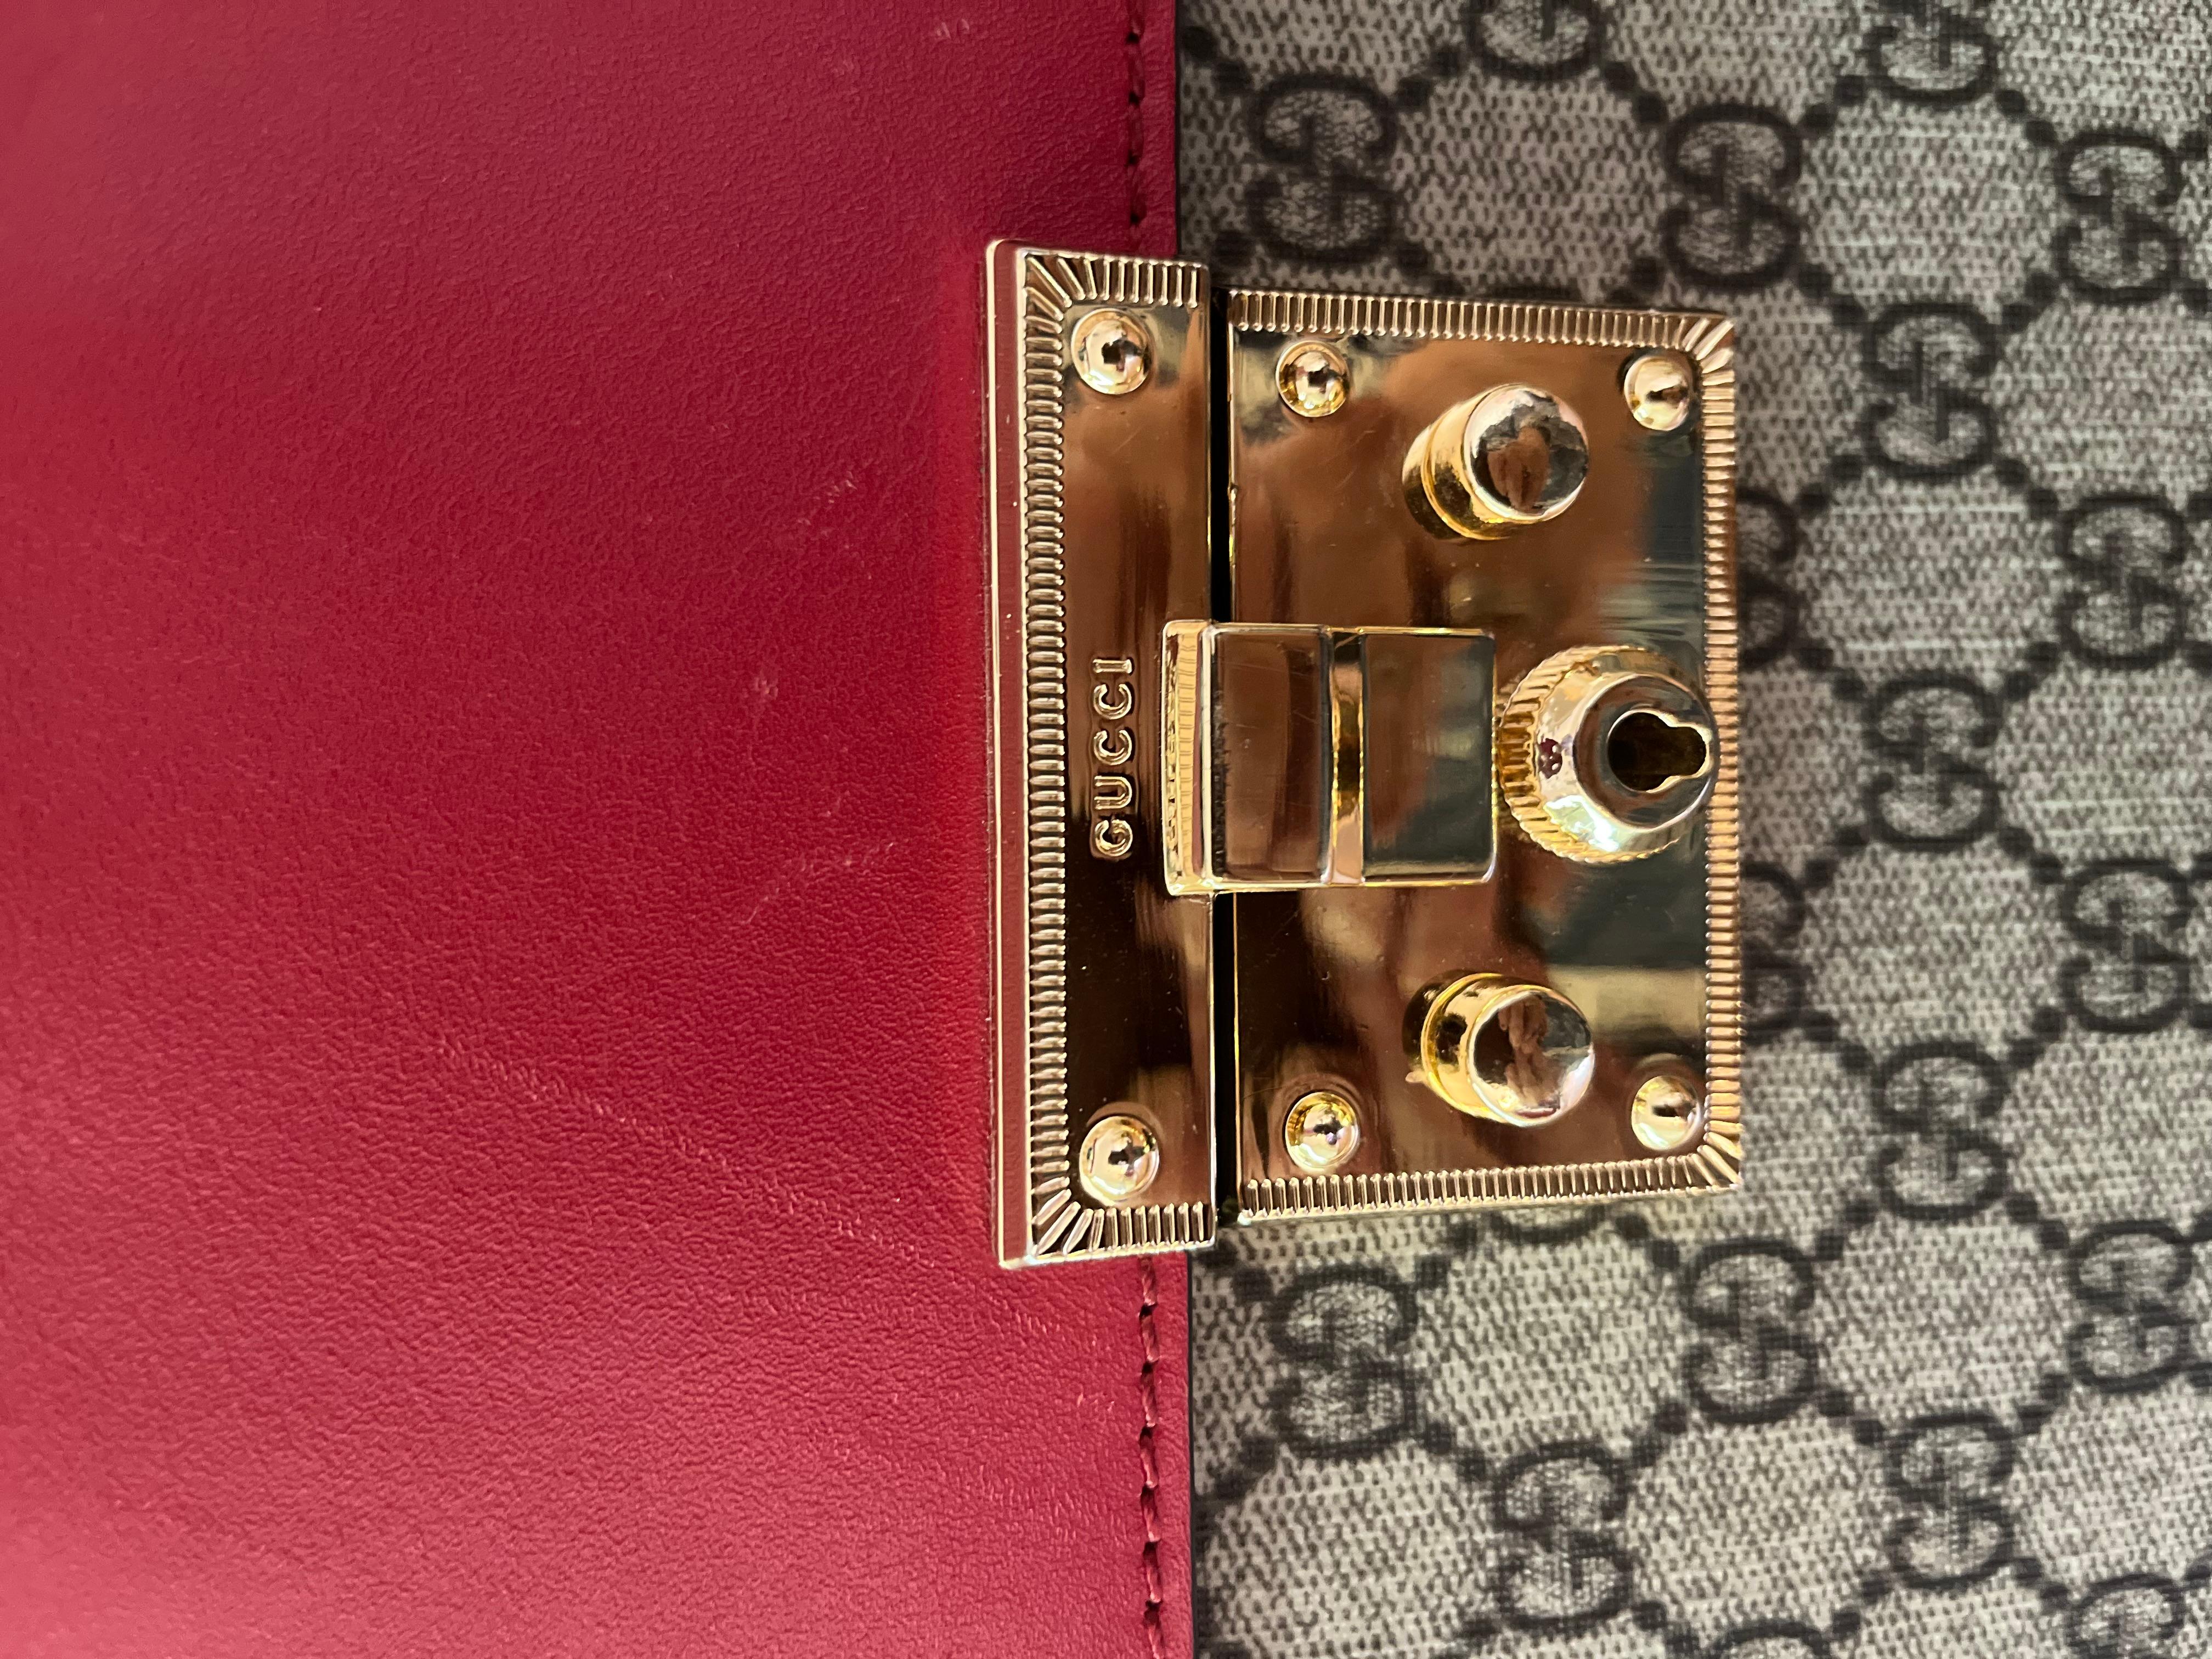 pink and red gucci bag